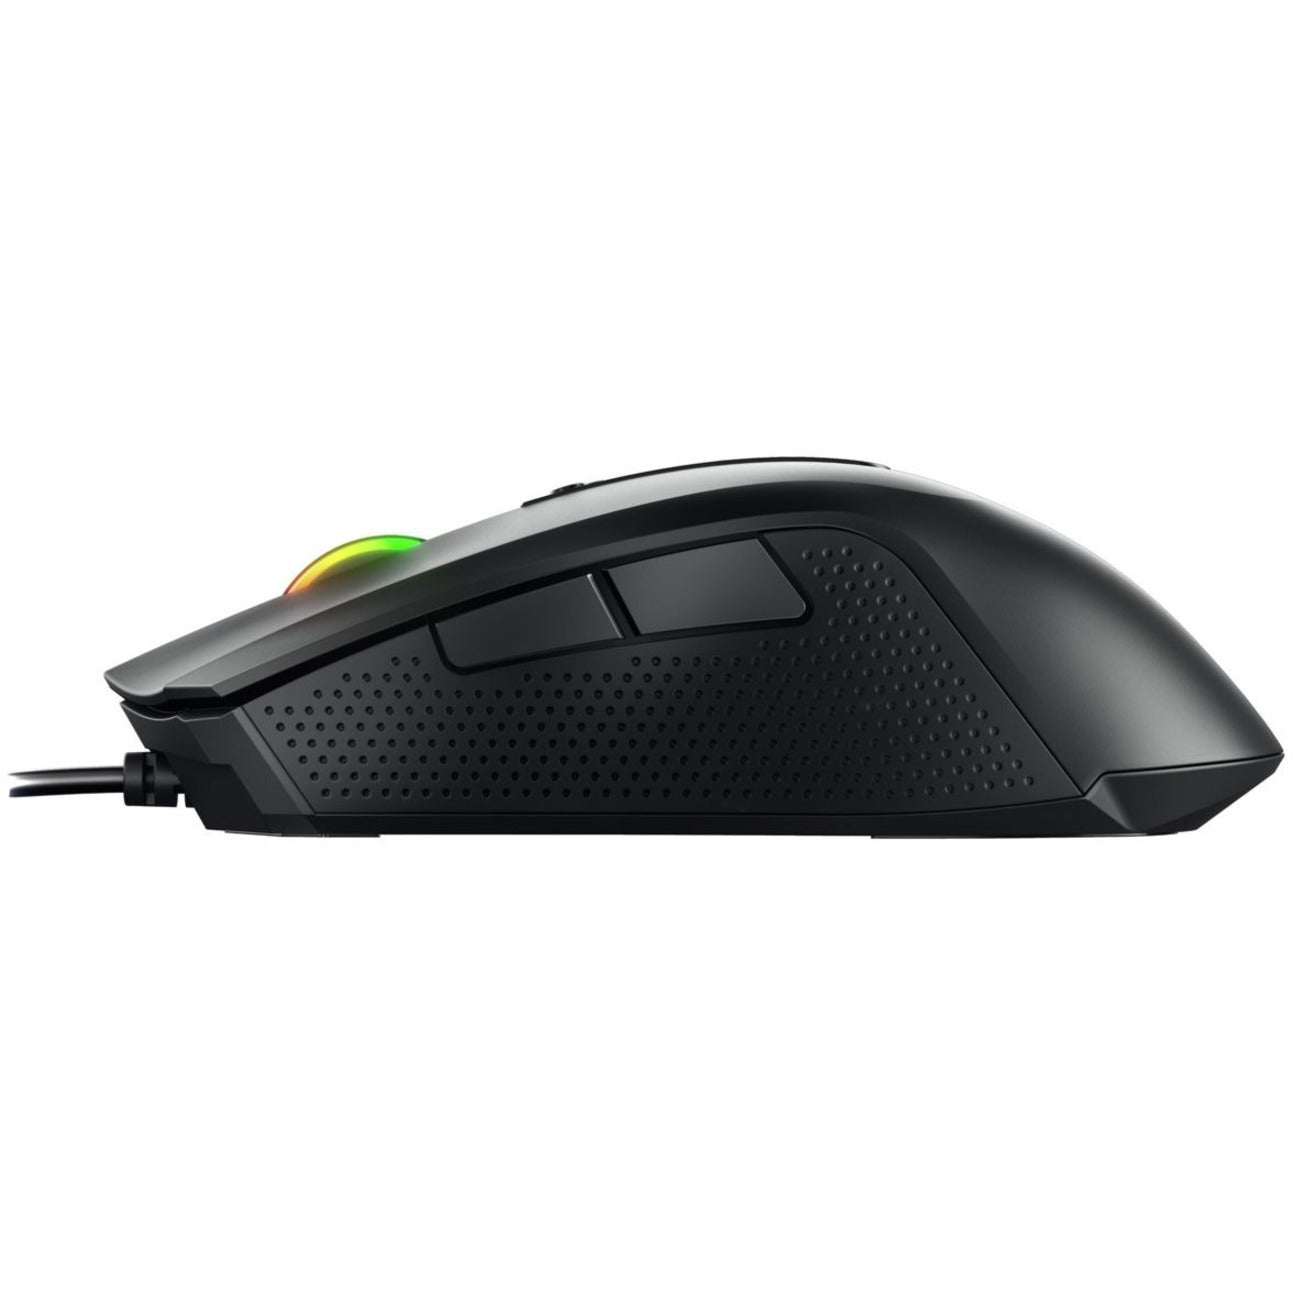 CHERRY JM-2200-2 MC 2.1 Gaming Mouse, Enhanced Gaming Experience